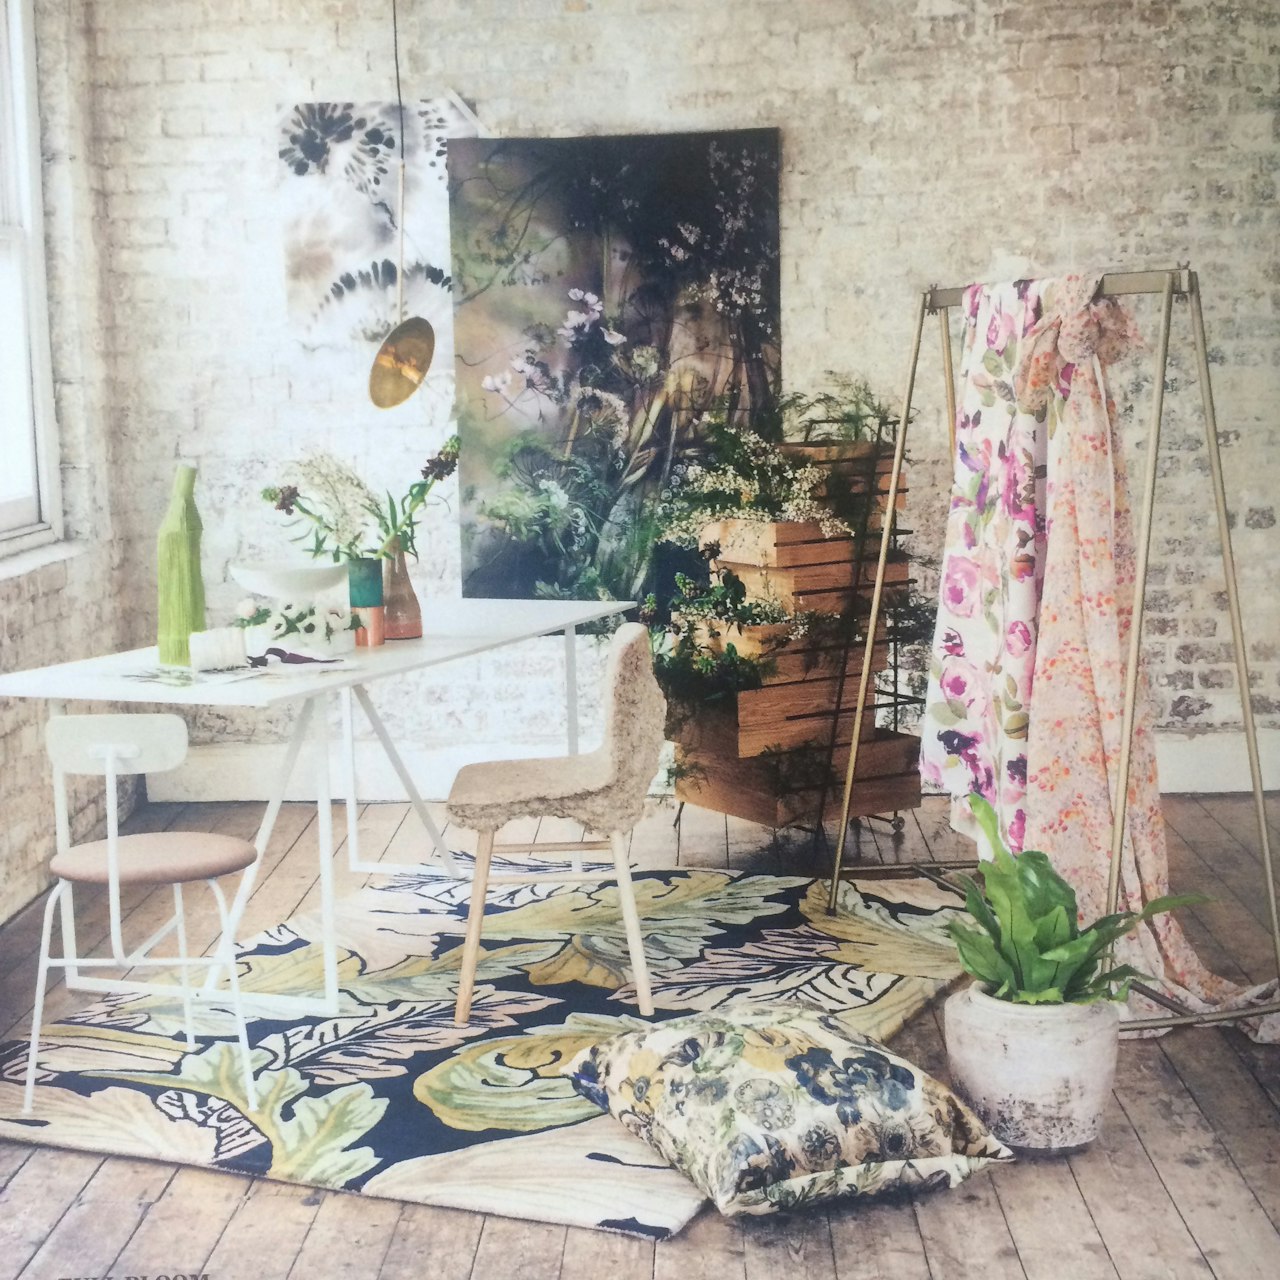 Elle Decoration, 'Its Spring, Full Bloom' May 2015